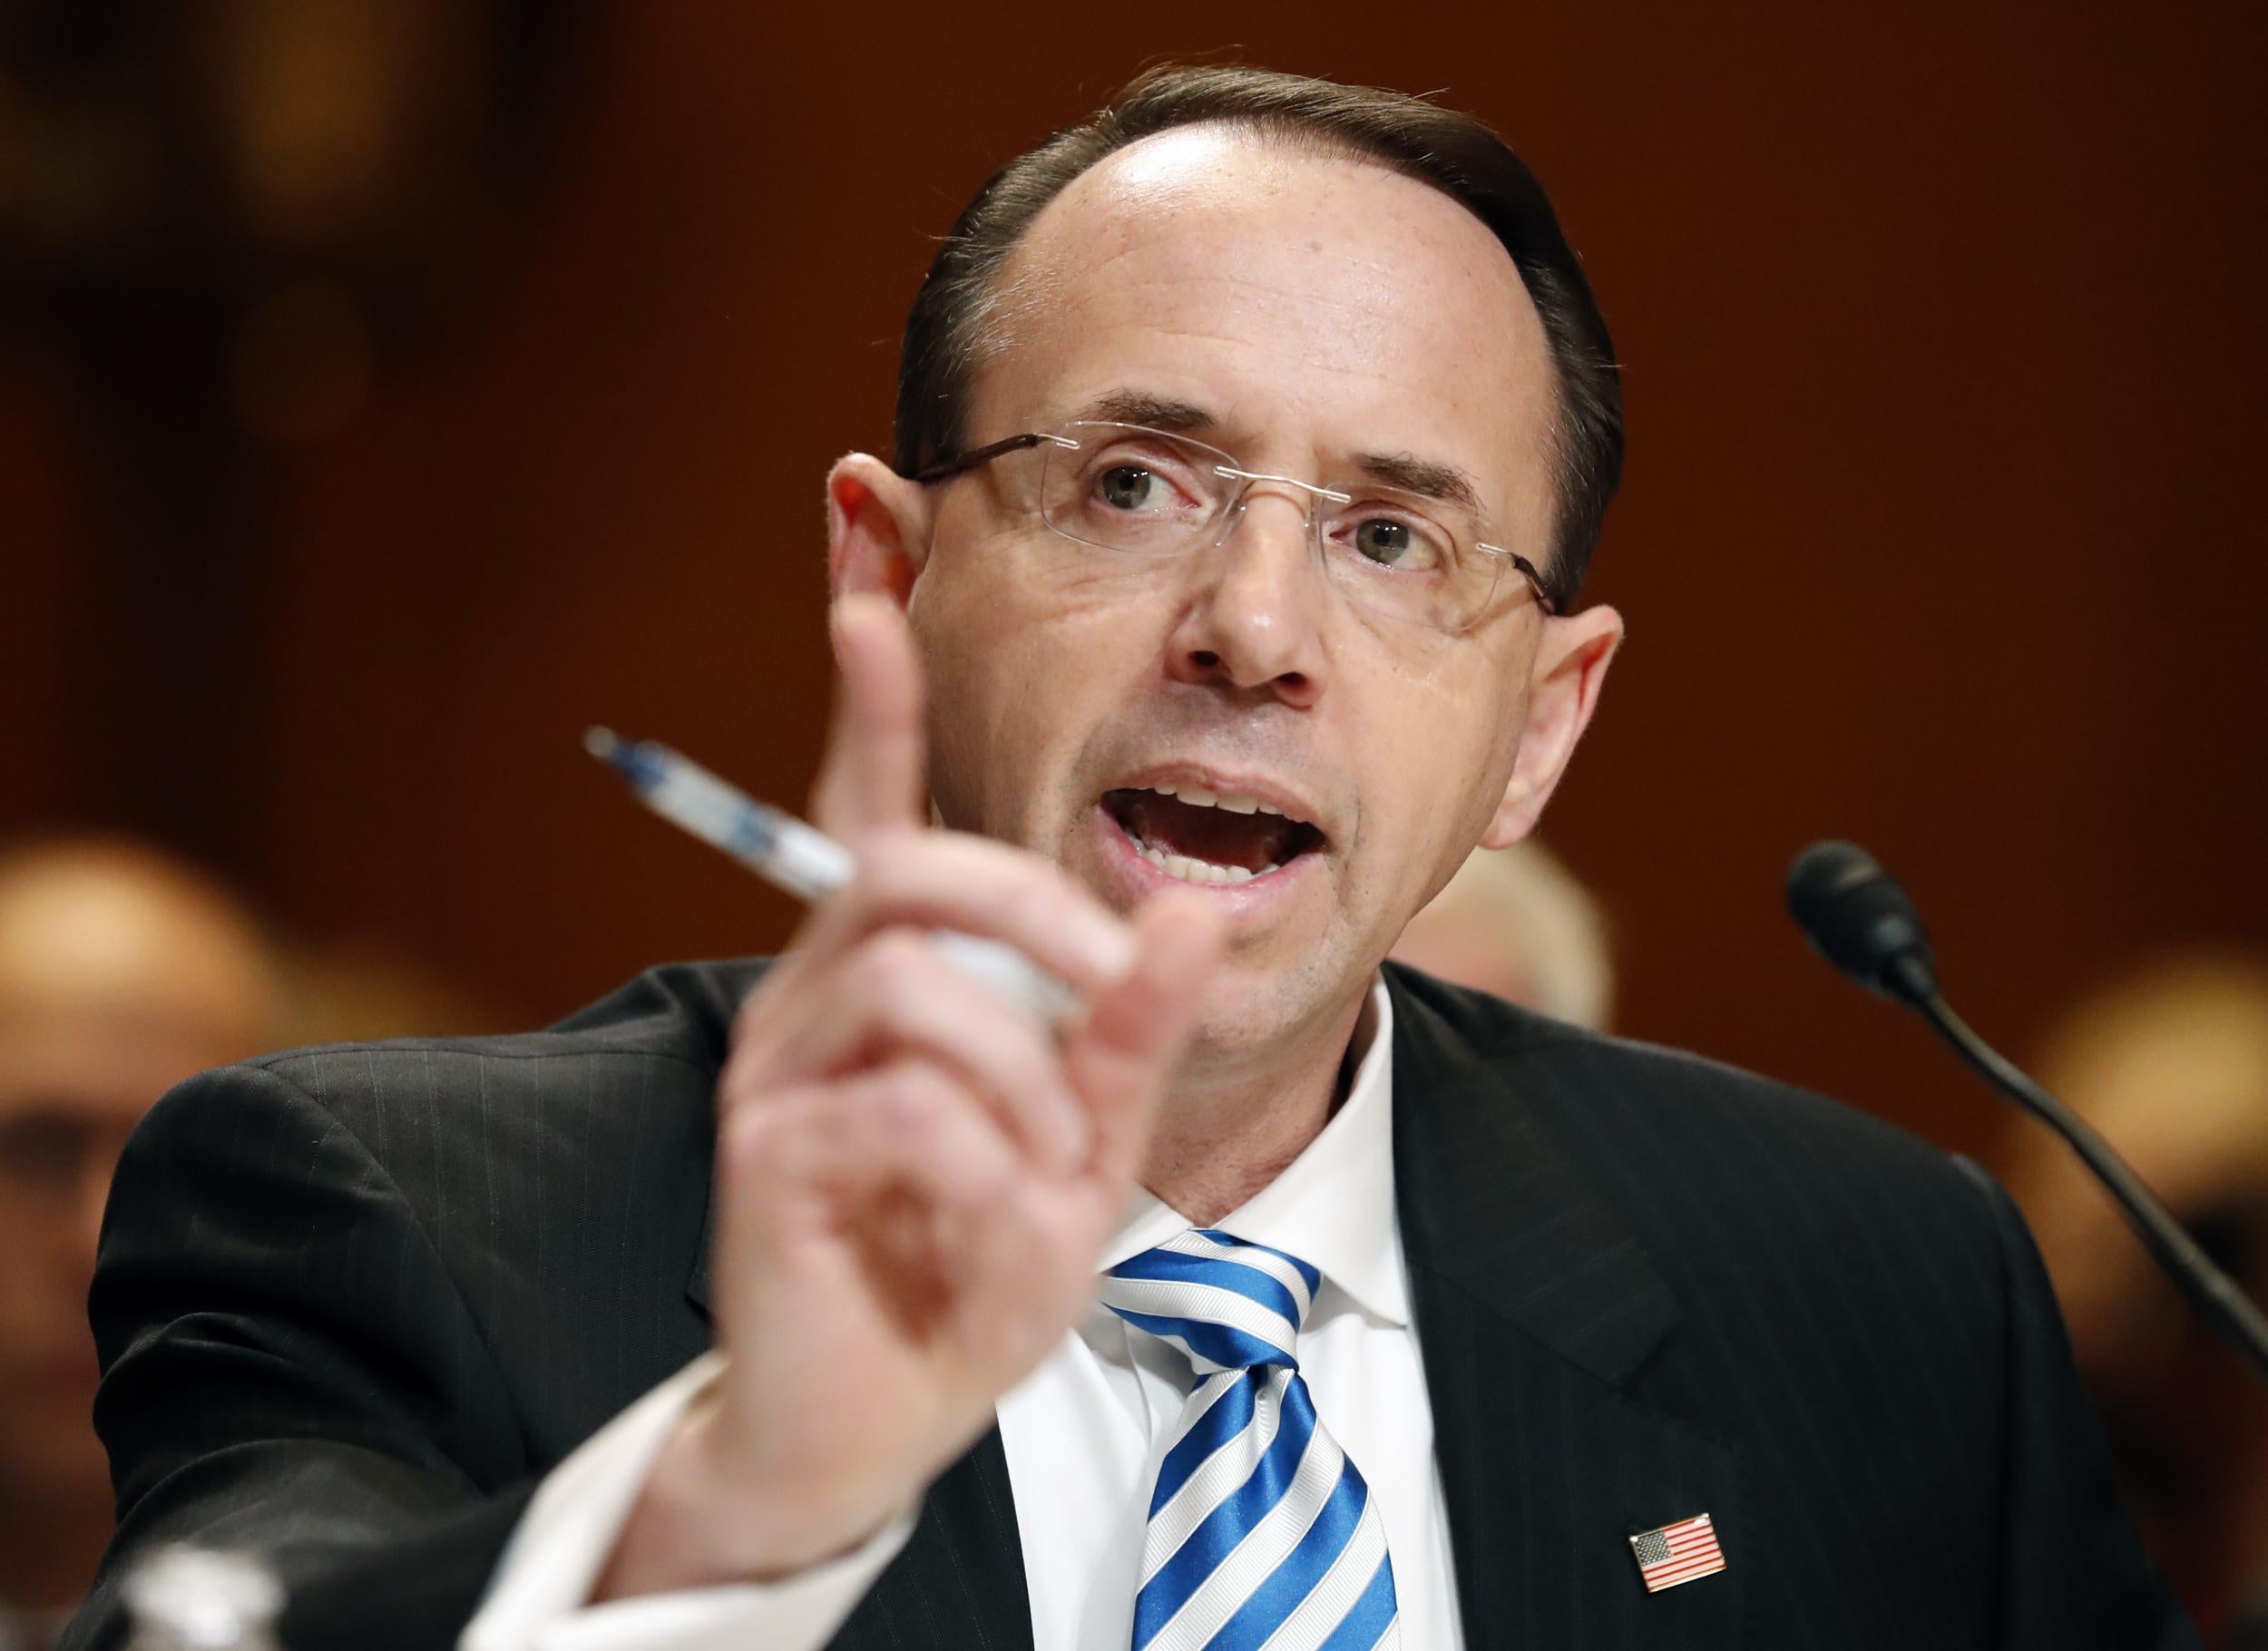 Mr Rosenstein appointed special counsel to investigate Russia's meddling last year